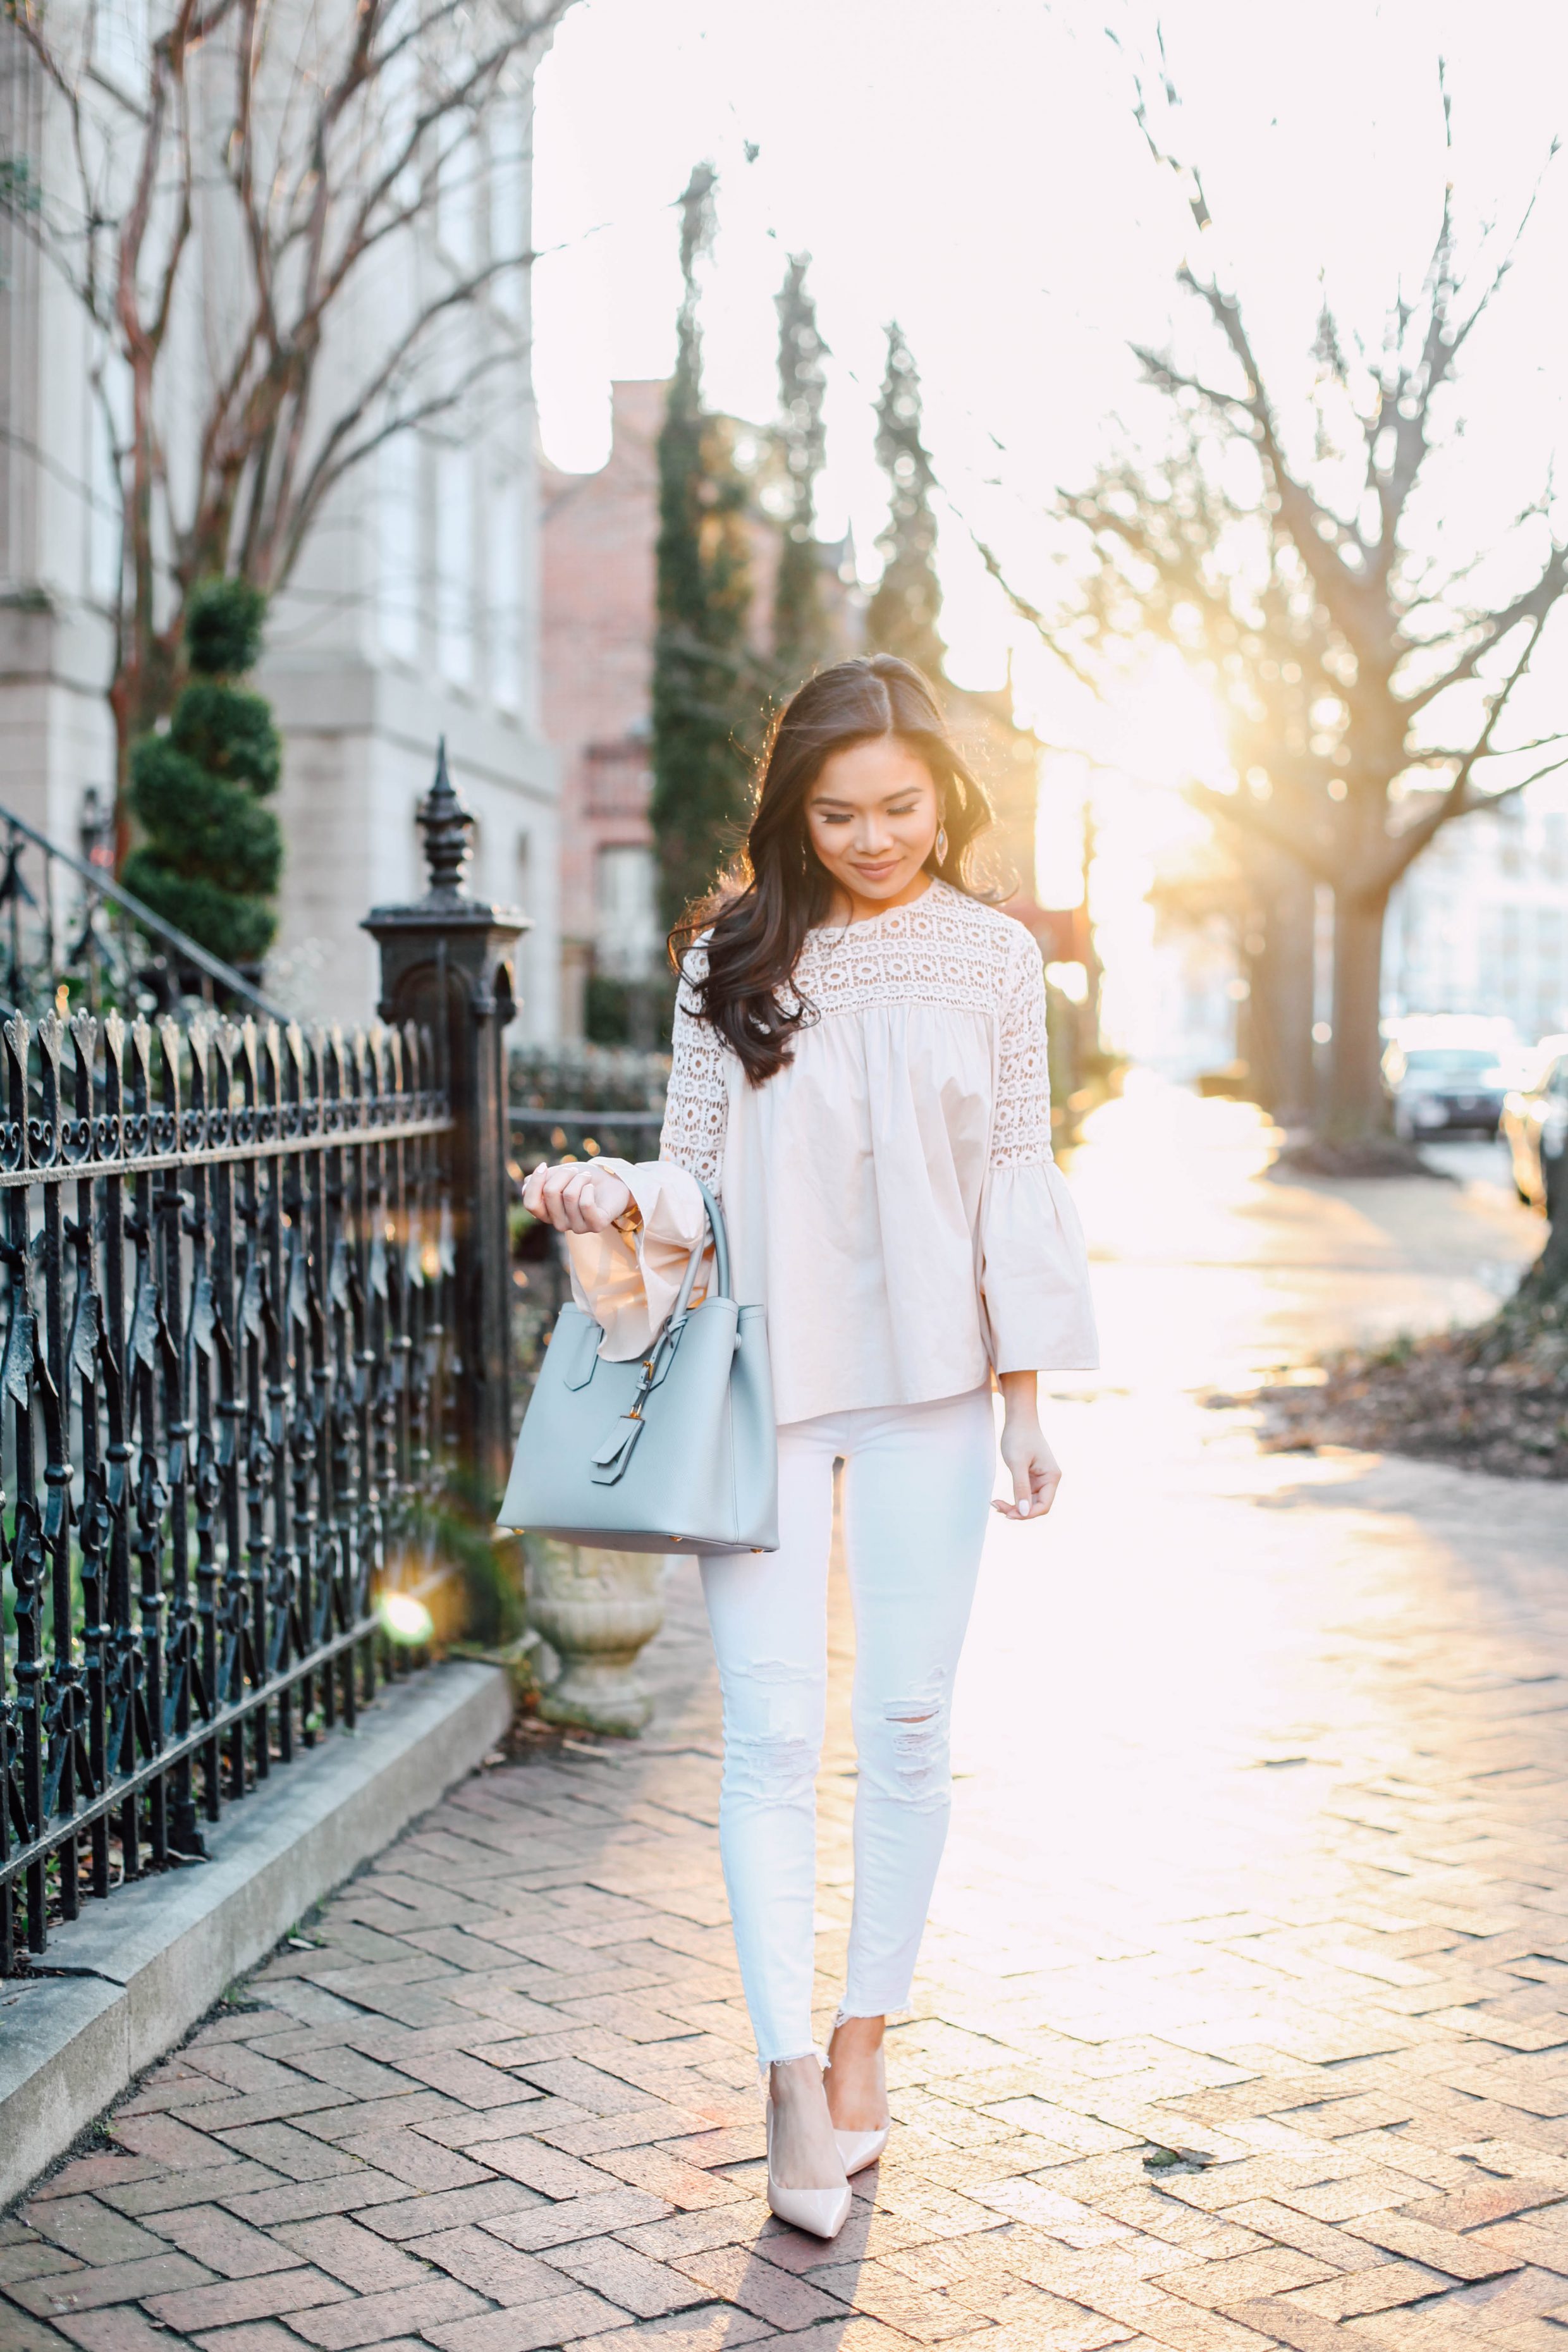 Crochet and bell sleeves on the perfect top for spring